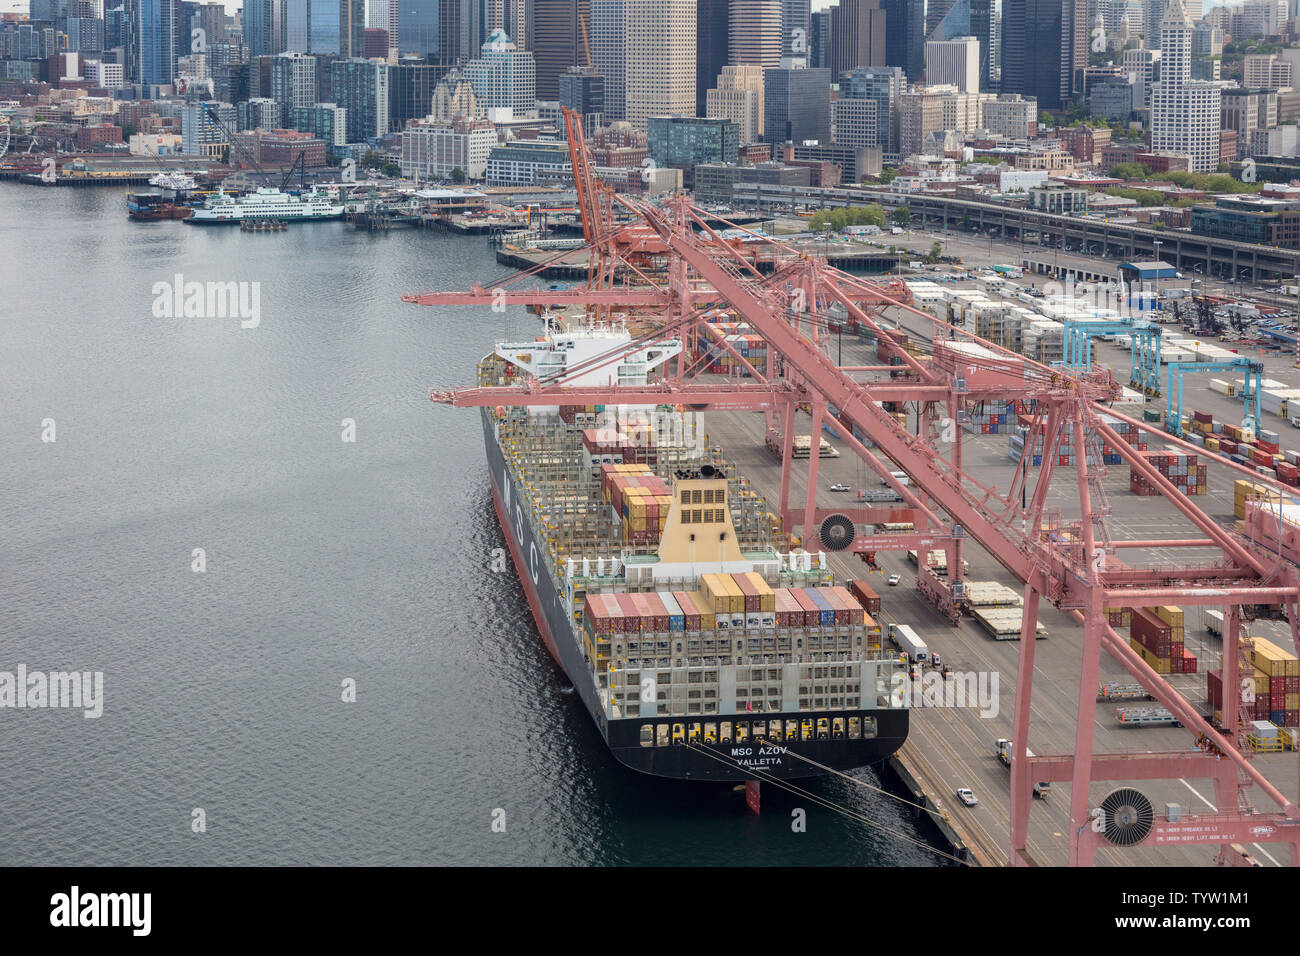 aerial view of container ship MSC Azov Valetta, Malta at industrial area of SoDo, Seattle, Washington State, USA Stock Photo